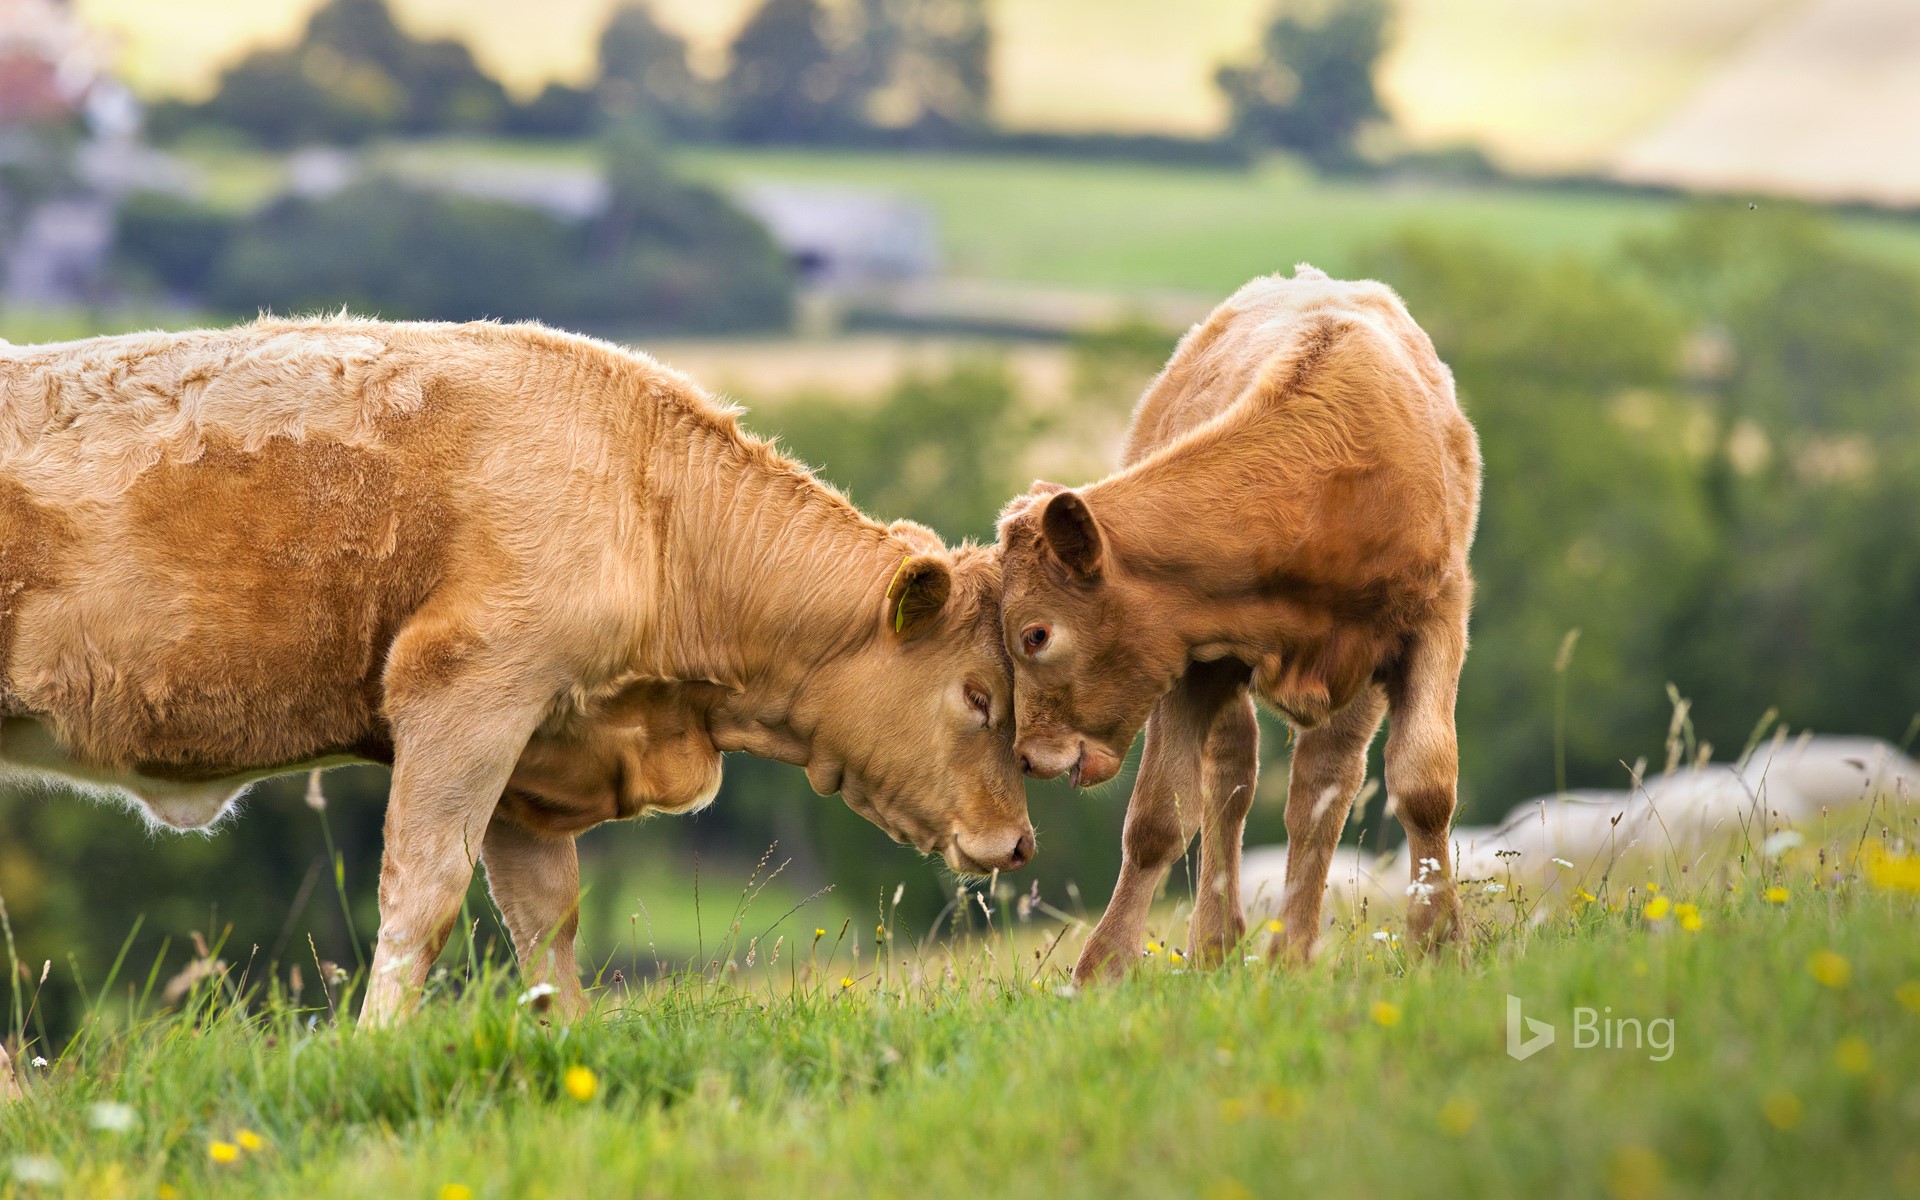 Cow with calf in a rural field for Mother’s Day